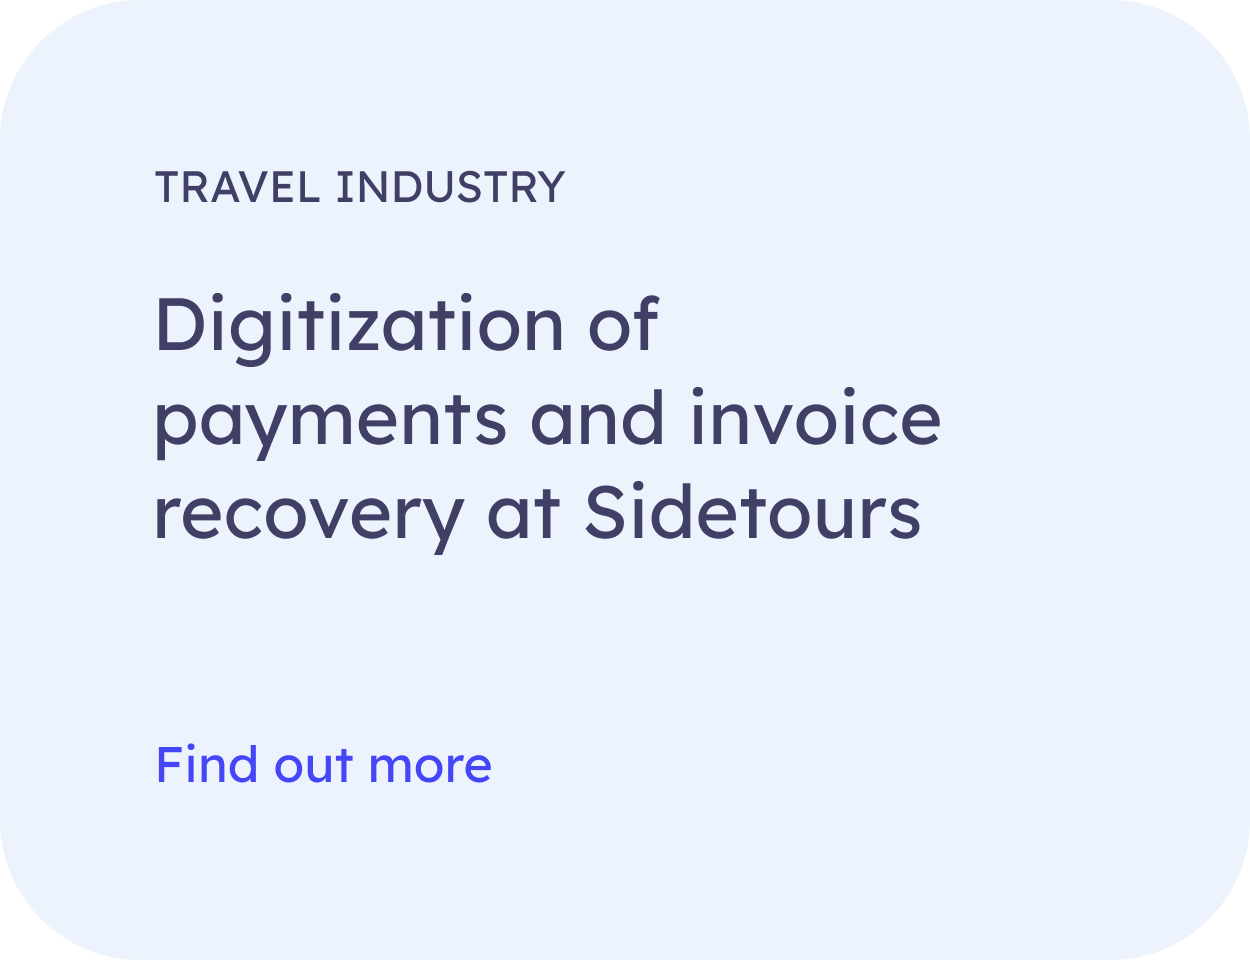 Digitization of payments and invoice recovery at Sidetours